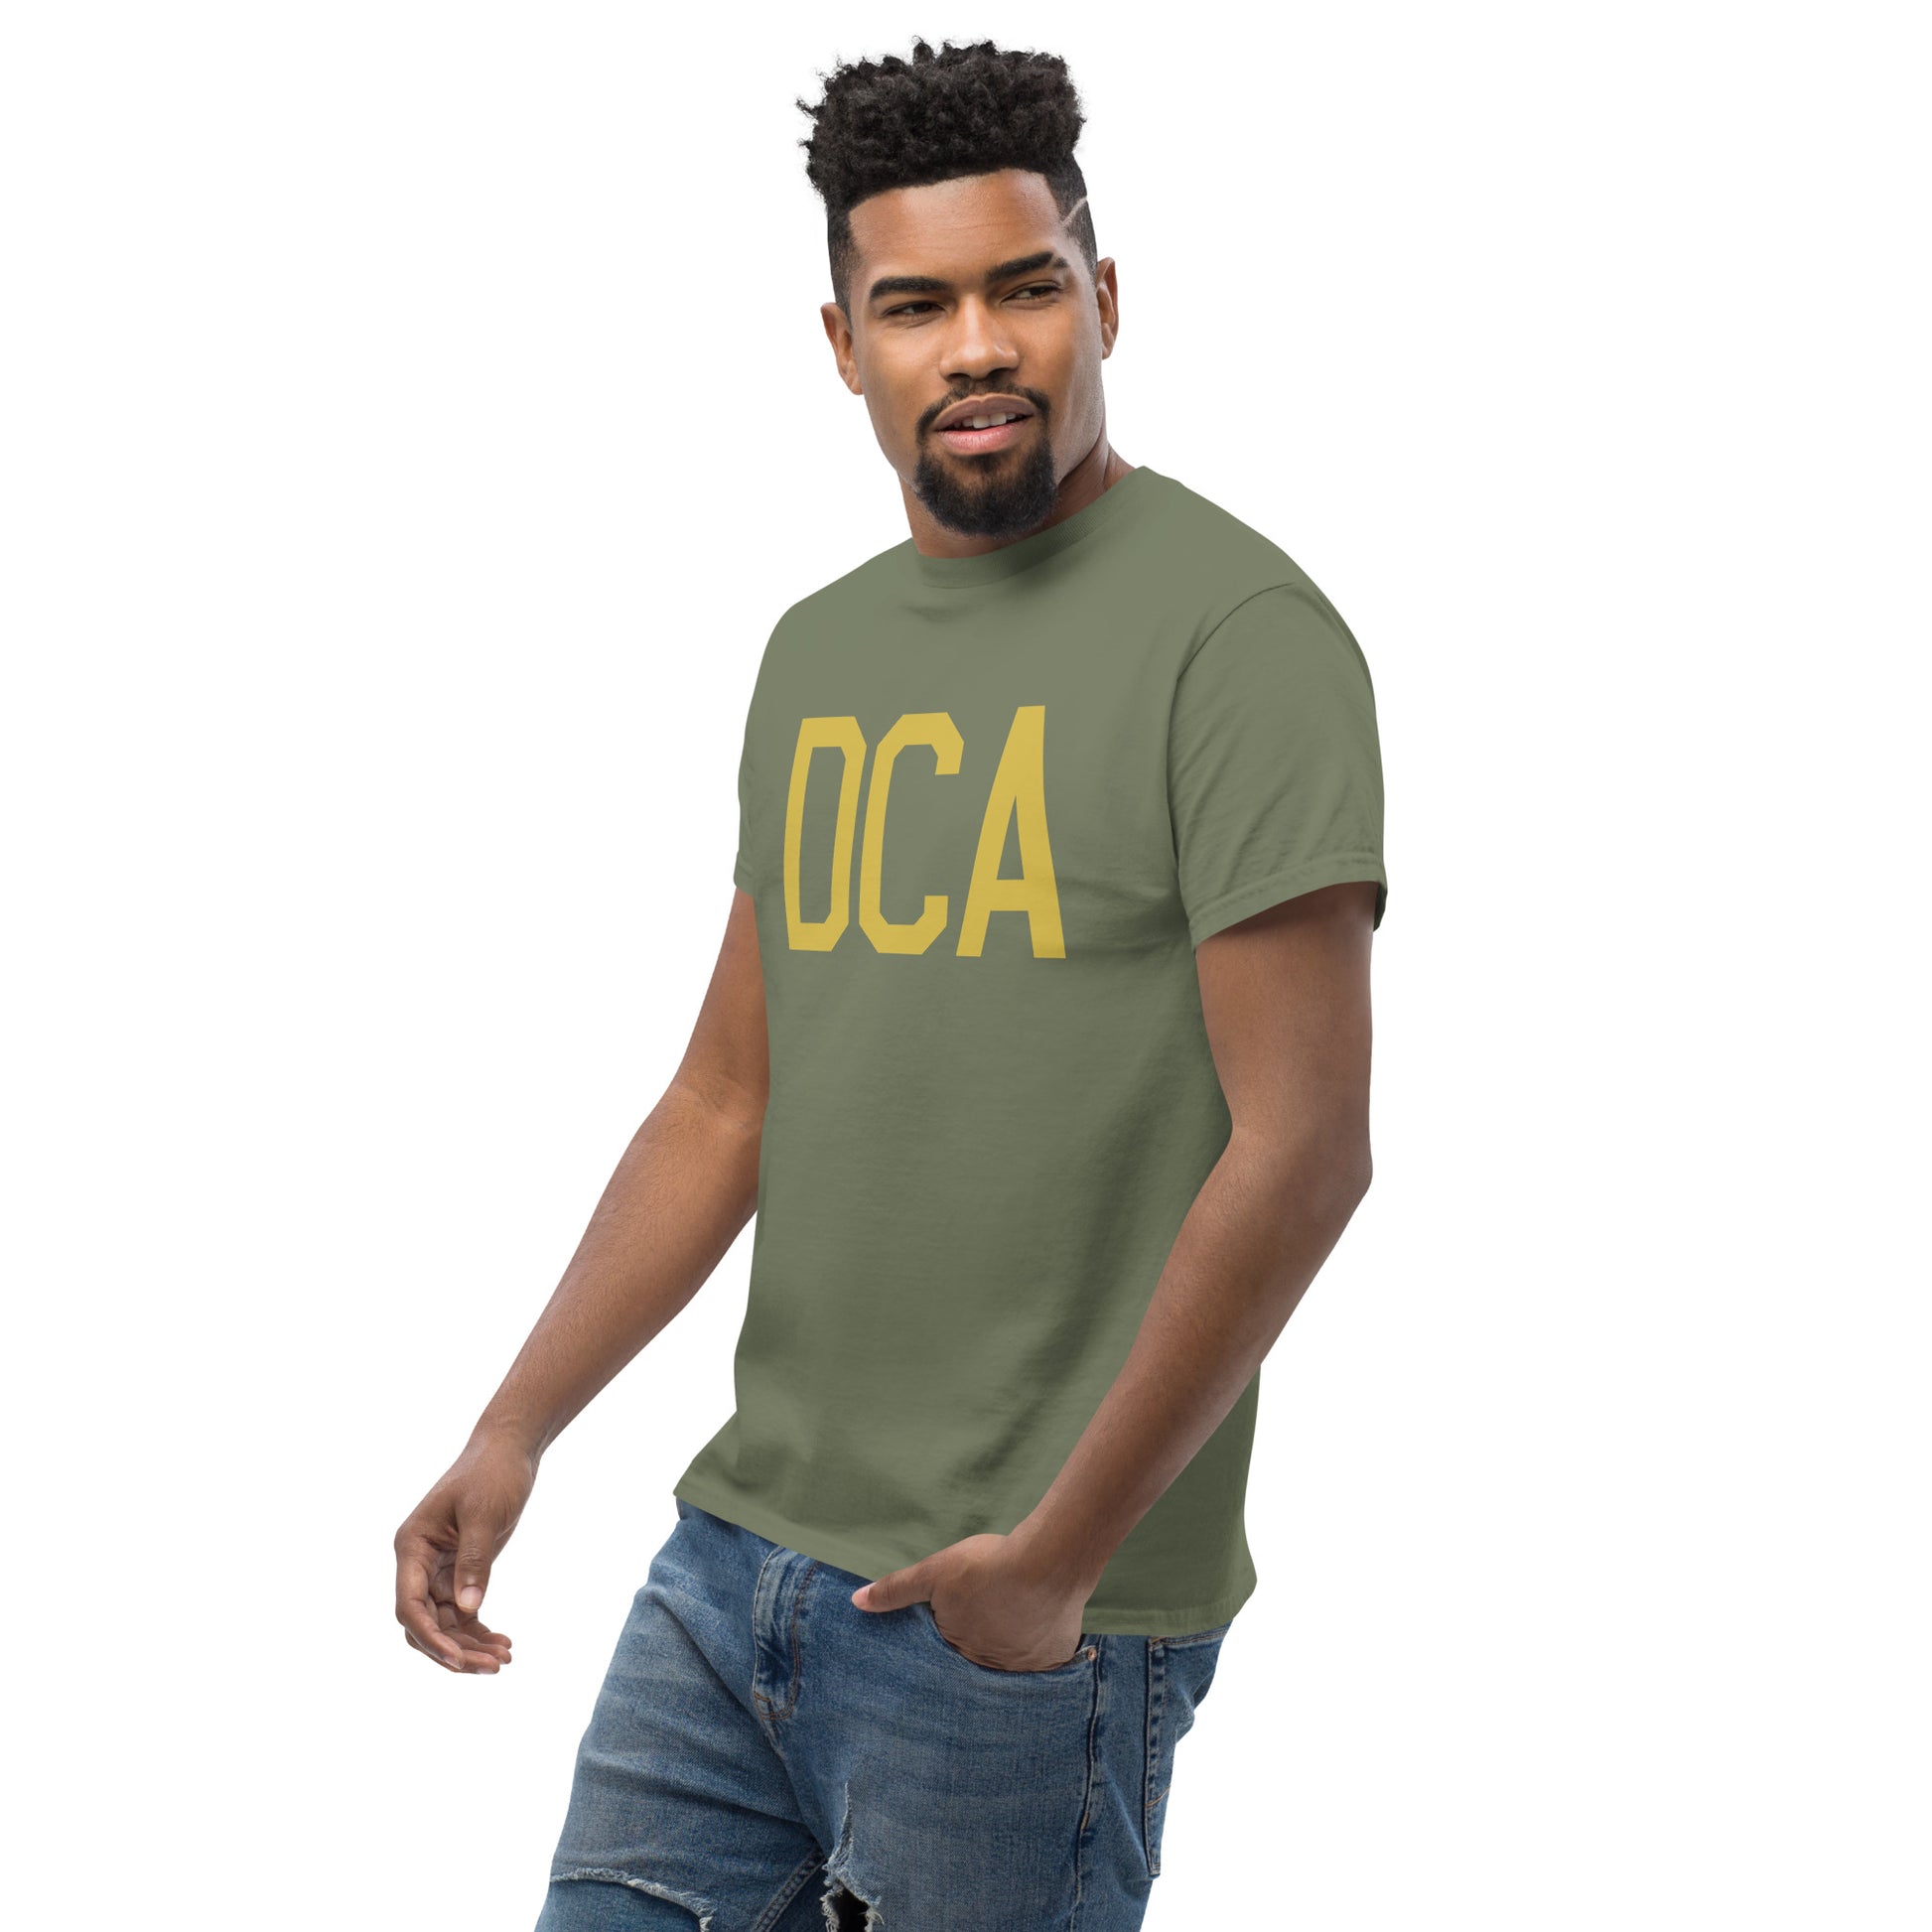 Aviation Enthusiast Men's Tee - Old Gold Graphic • DCA Washington • YHM Designs - Image 07